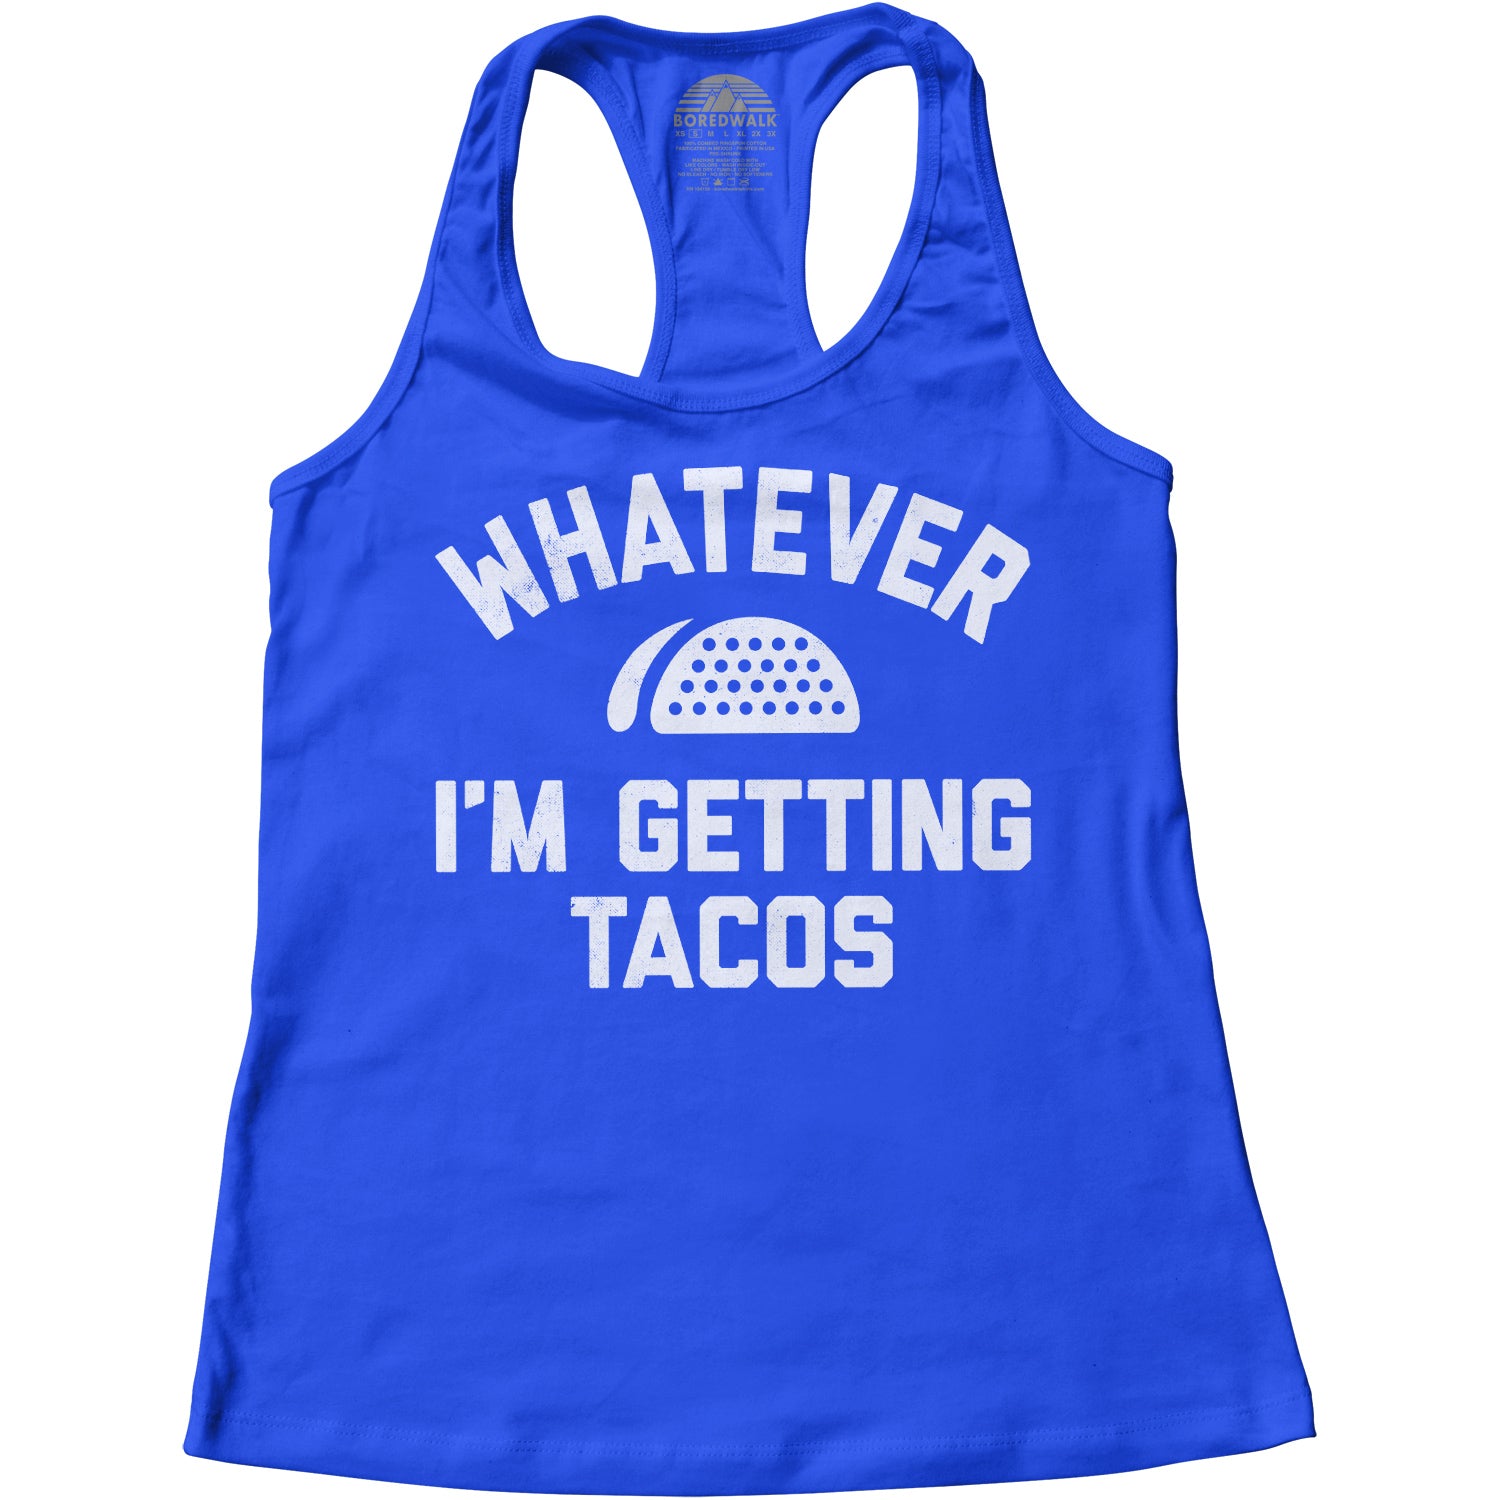 Women's Whatever I'm Getting Tacos Racerback Tank Top